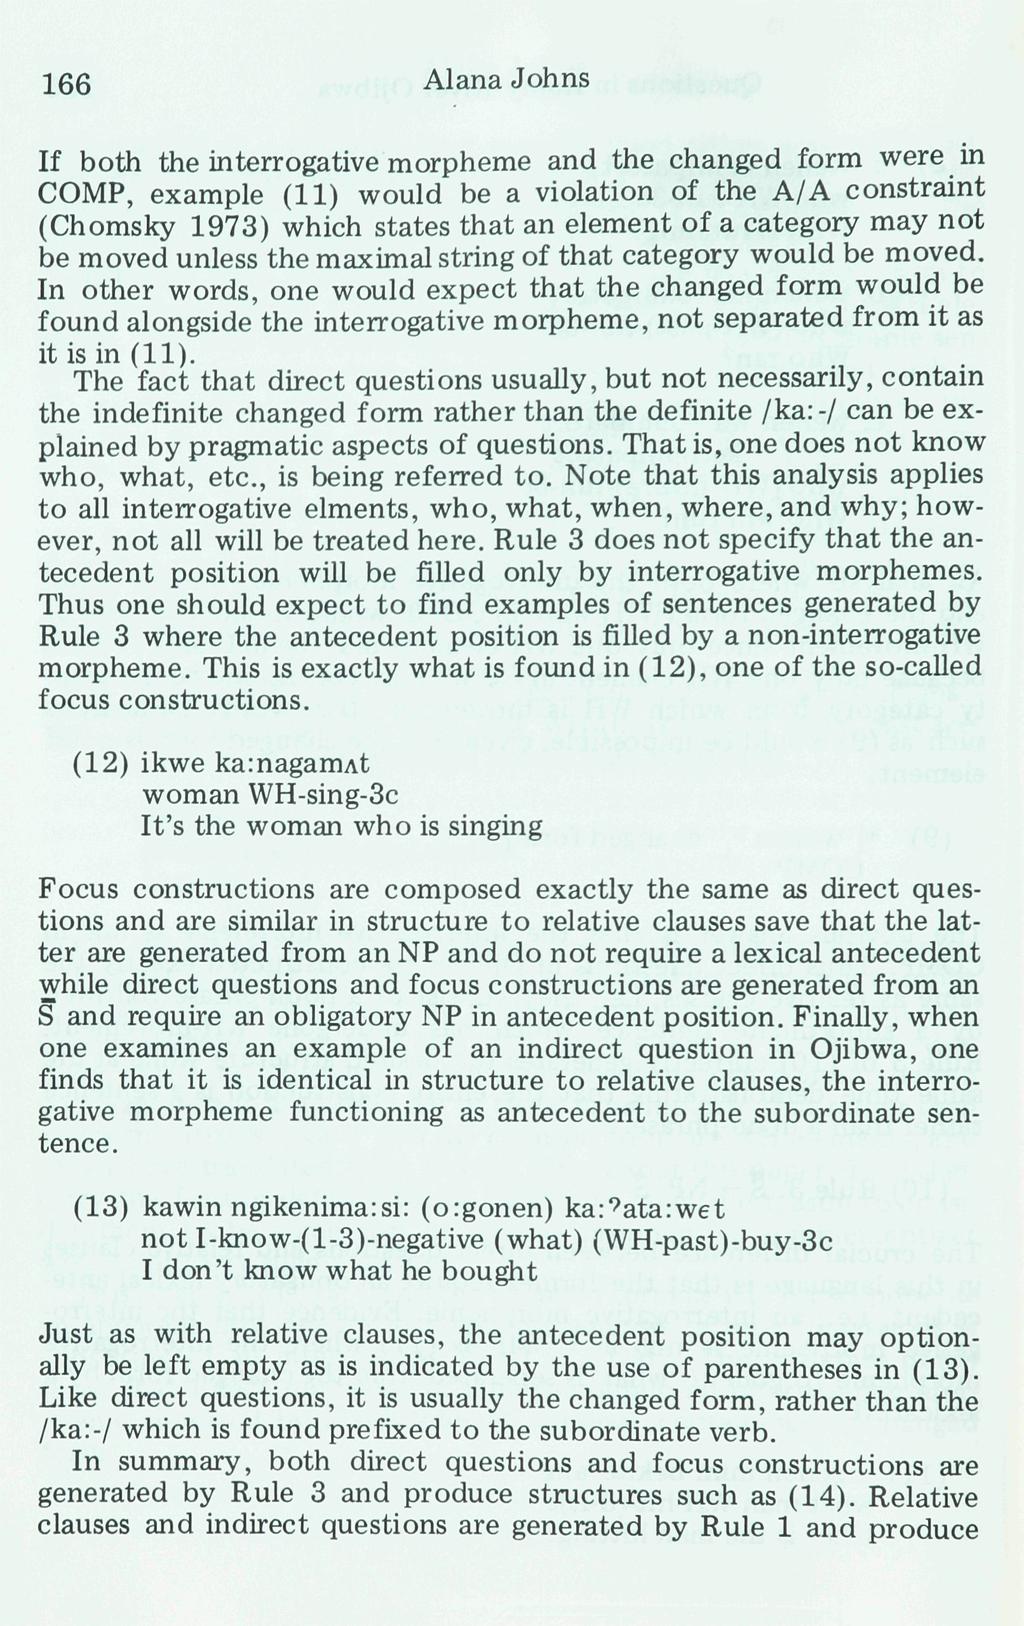 166 Alana Johns If both the interrogative morpheme and the changed form were in COMP, example (11) would be a violation of the A/A constraint (Chomsky 1973) which states that an element of a category